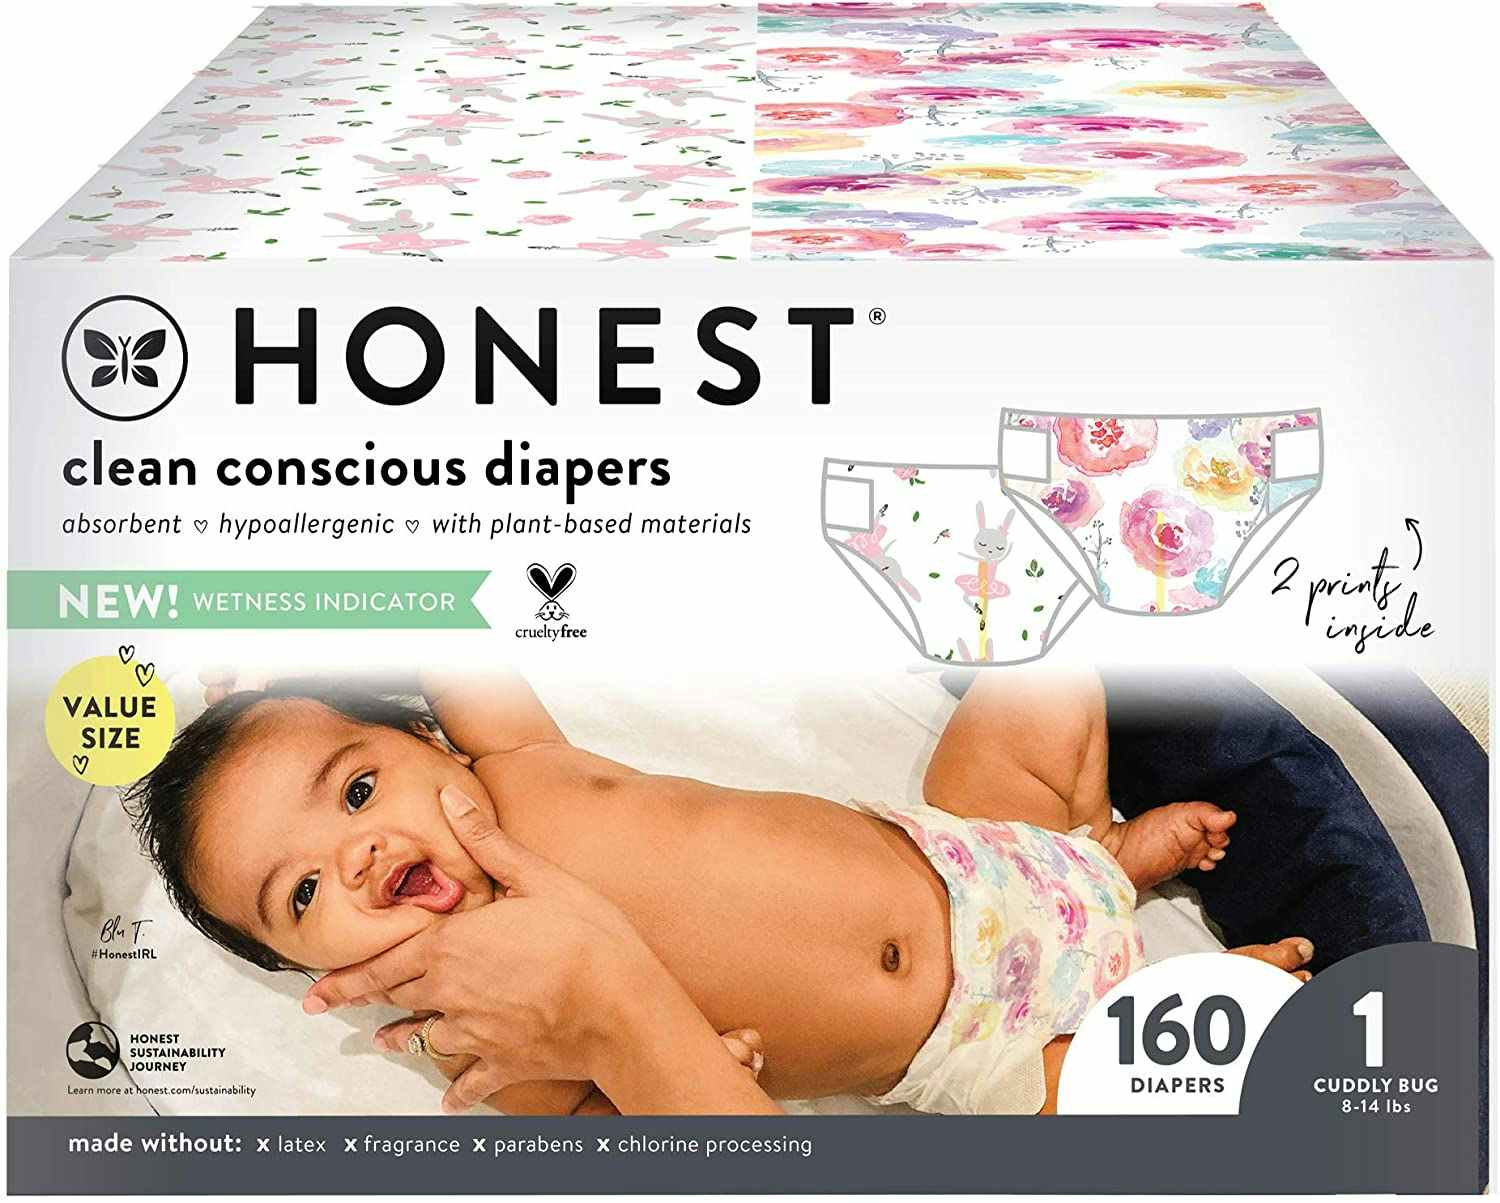 A box of The Honest Company size 1 diapers